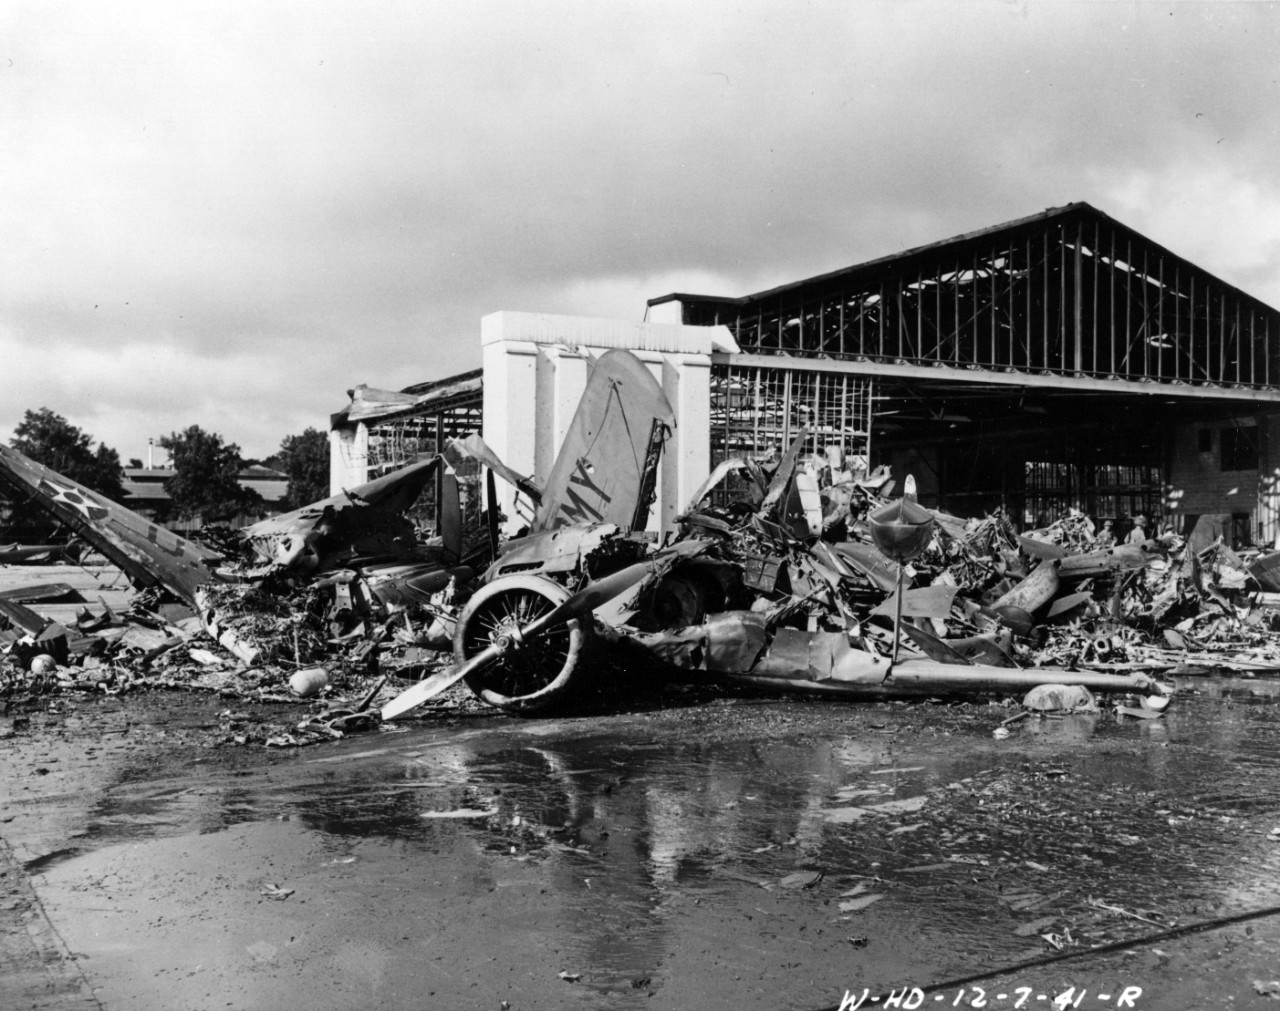 Aircraft wreckage on the ramp at Wheeler Field, Oahu, Hawaii, following the air attack of 7 Dec 1941.